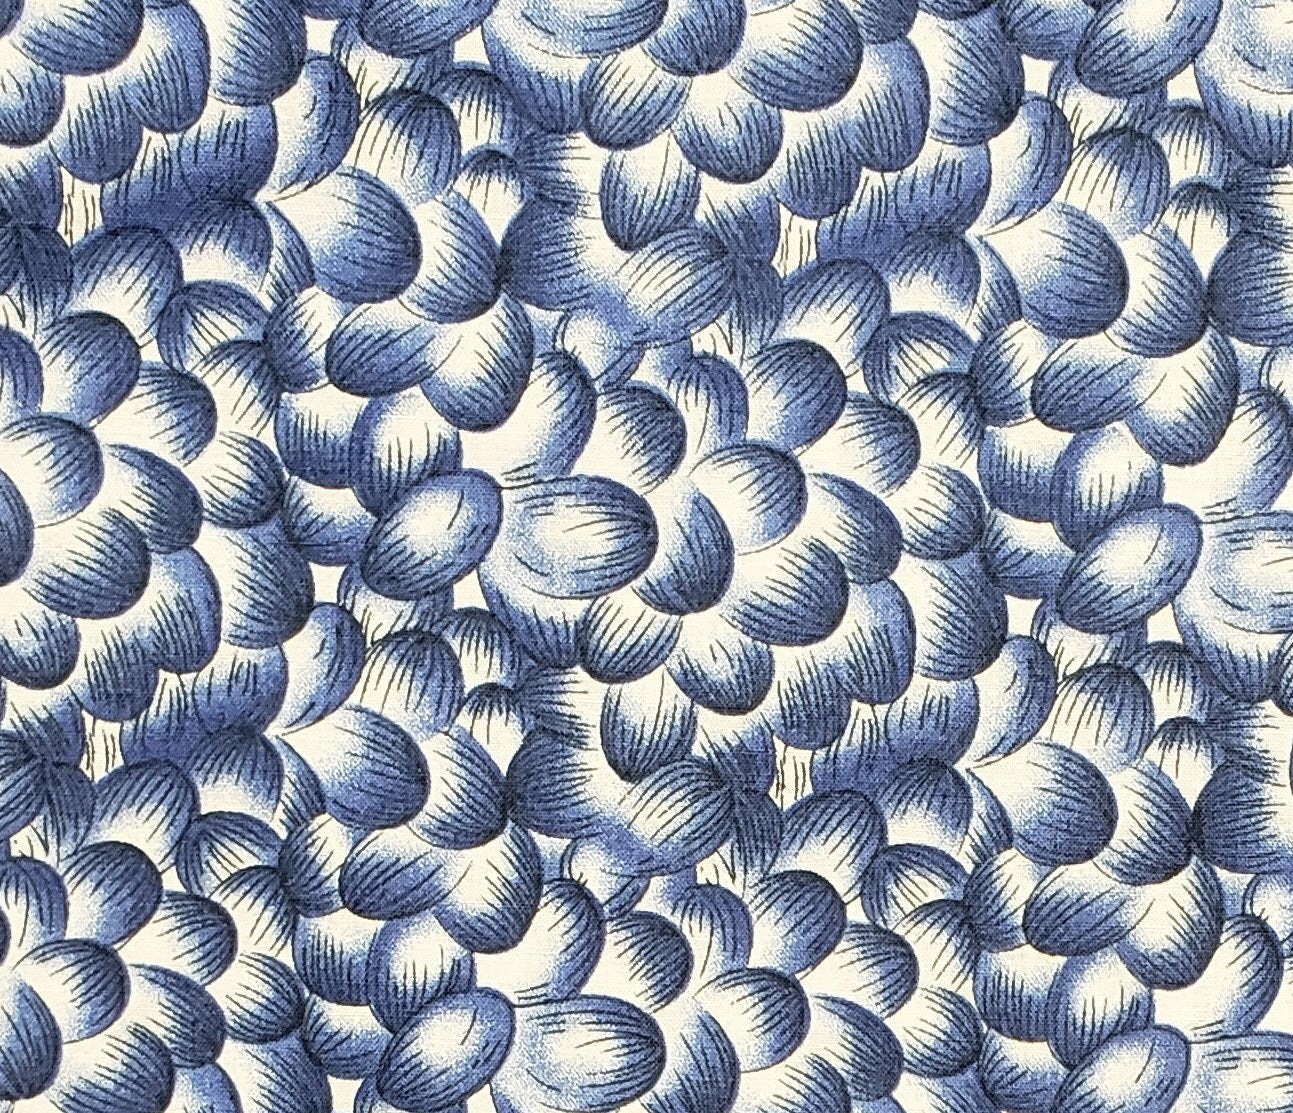 Designed by Beth Ann Bruske for David Textiles, Inc. - White Fabric with Dark Blue "Petal" Print